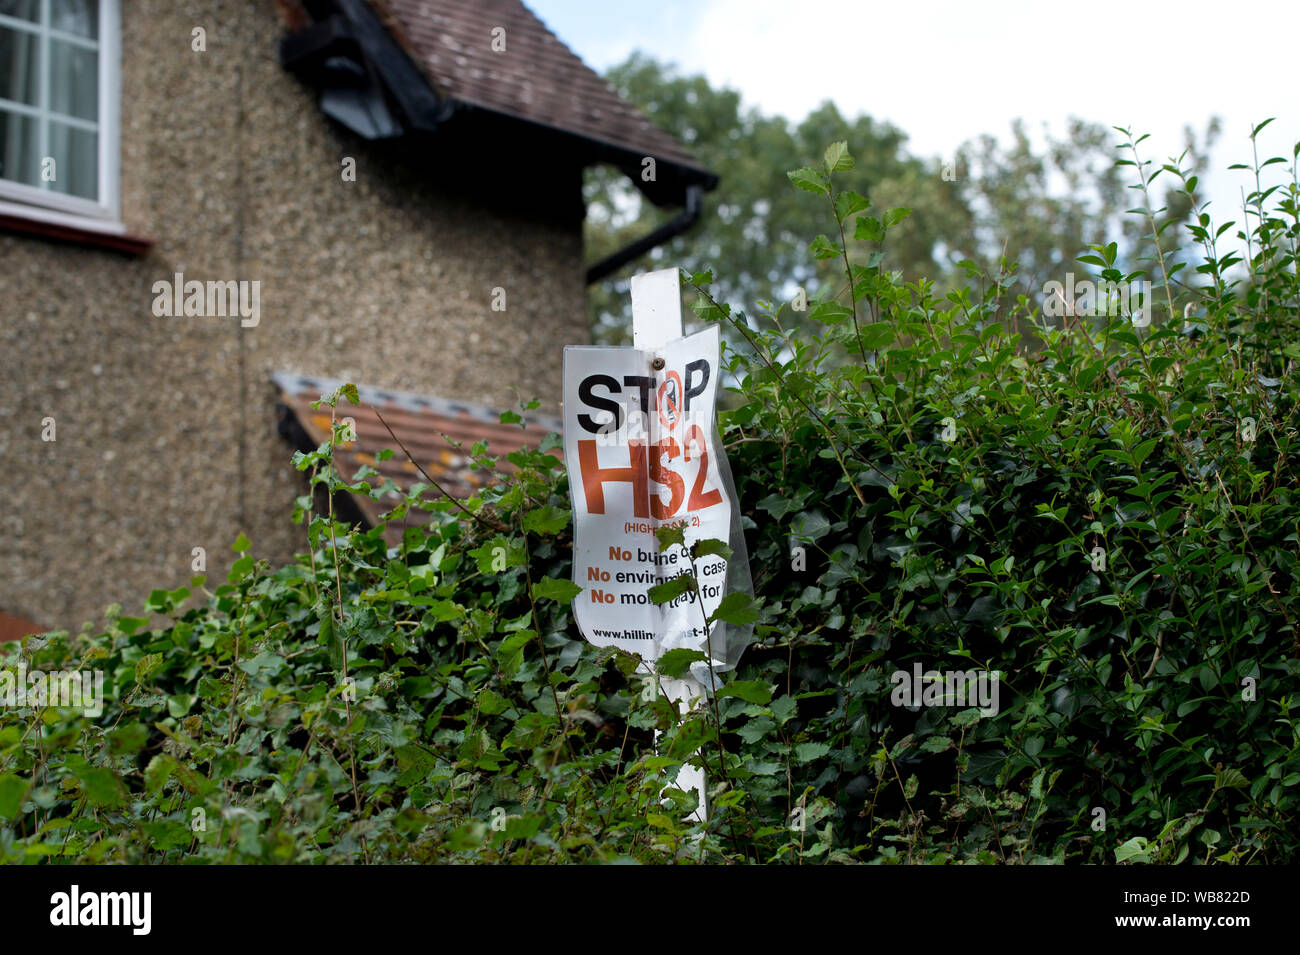 HS2. Colne valley. Harvil Road. A Stop HS2 poster on a lampost infront of a house on the HS2 site. Stock Photo